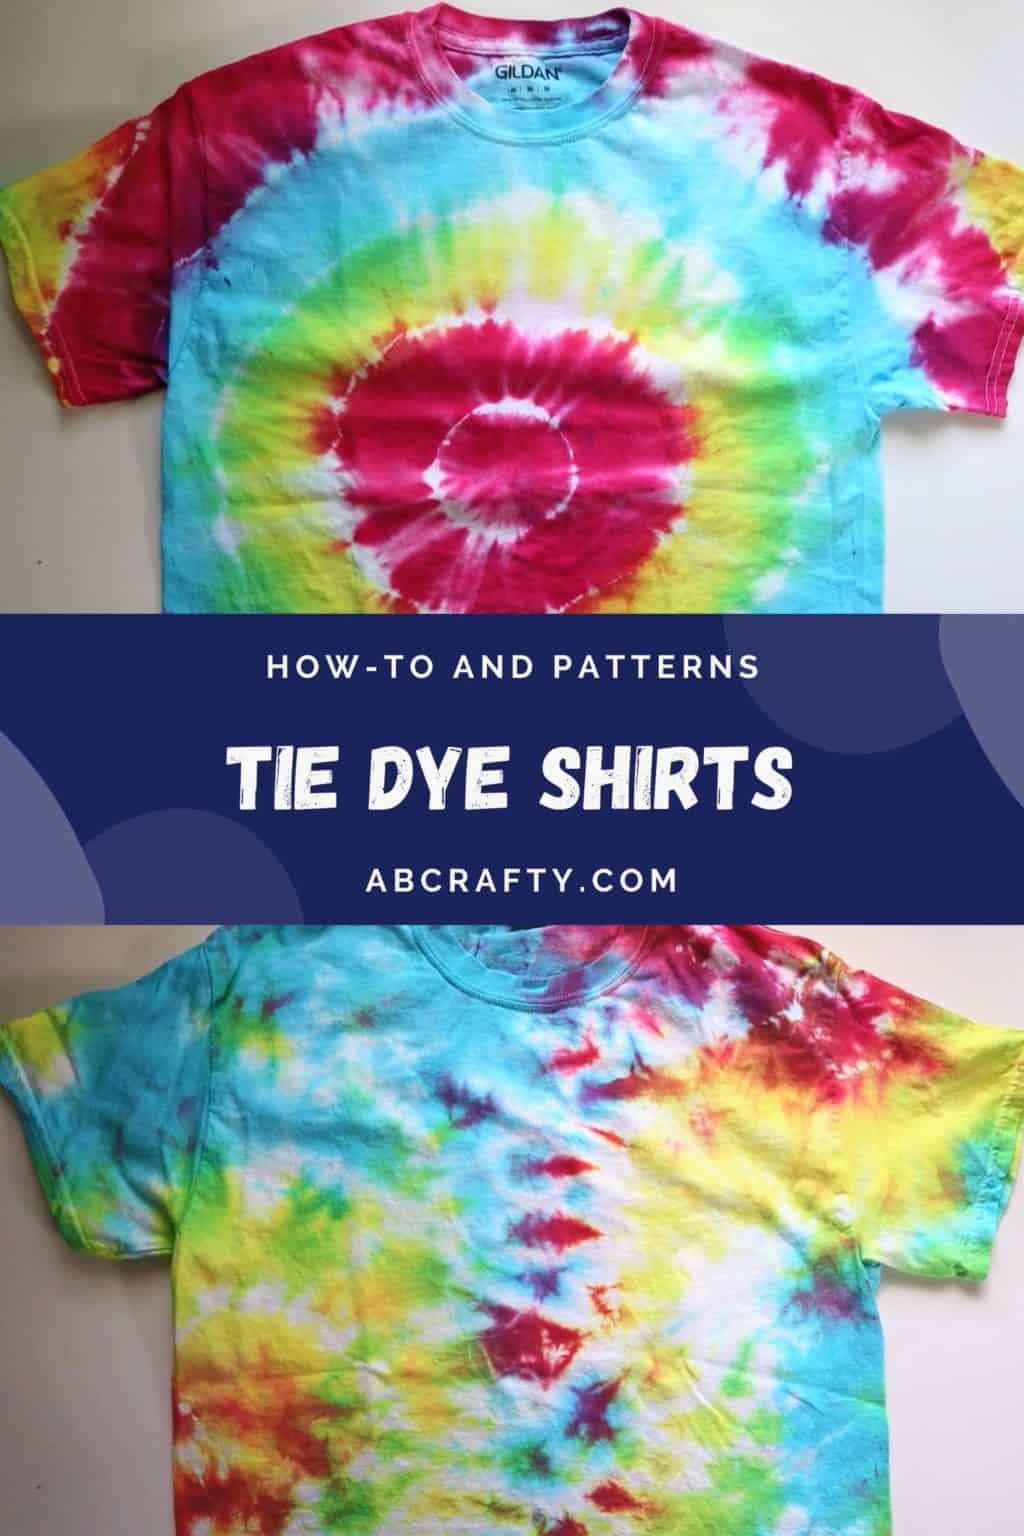 top image is a rainbow target tie dye shirt with the bottom photo of a scrunch tie dye shirt and the title "tie dye shirts how-to and patterns"